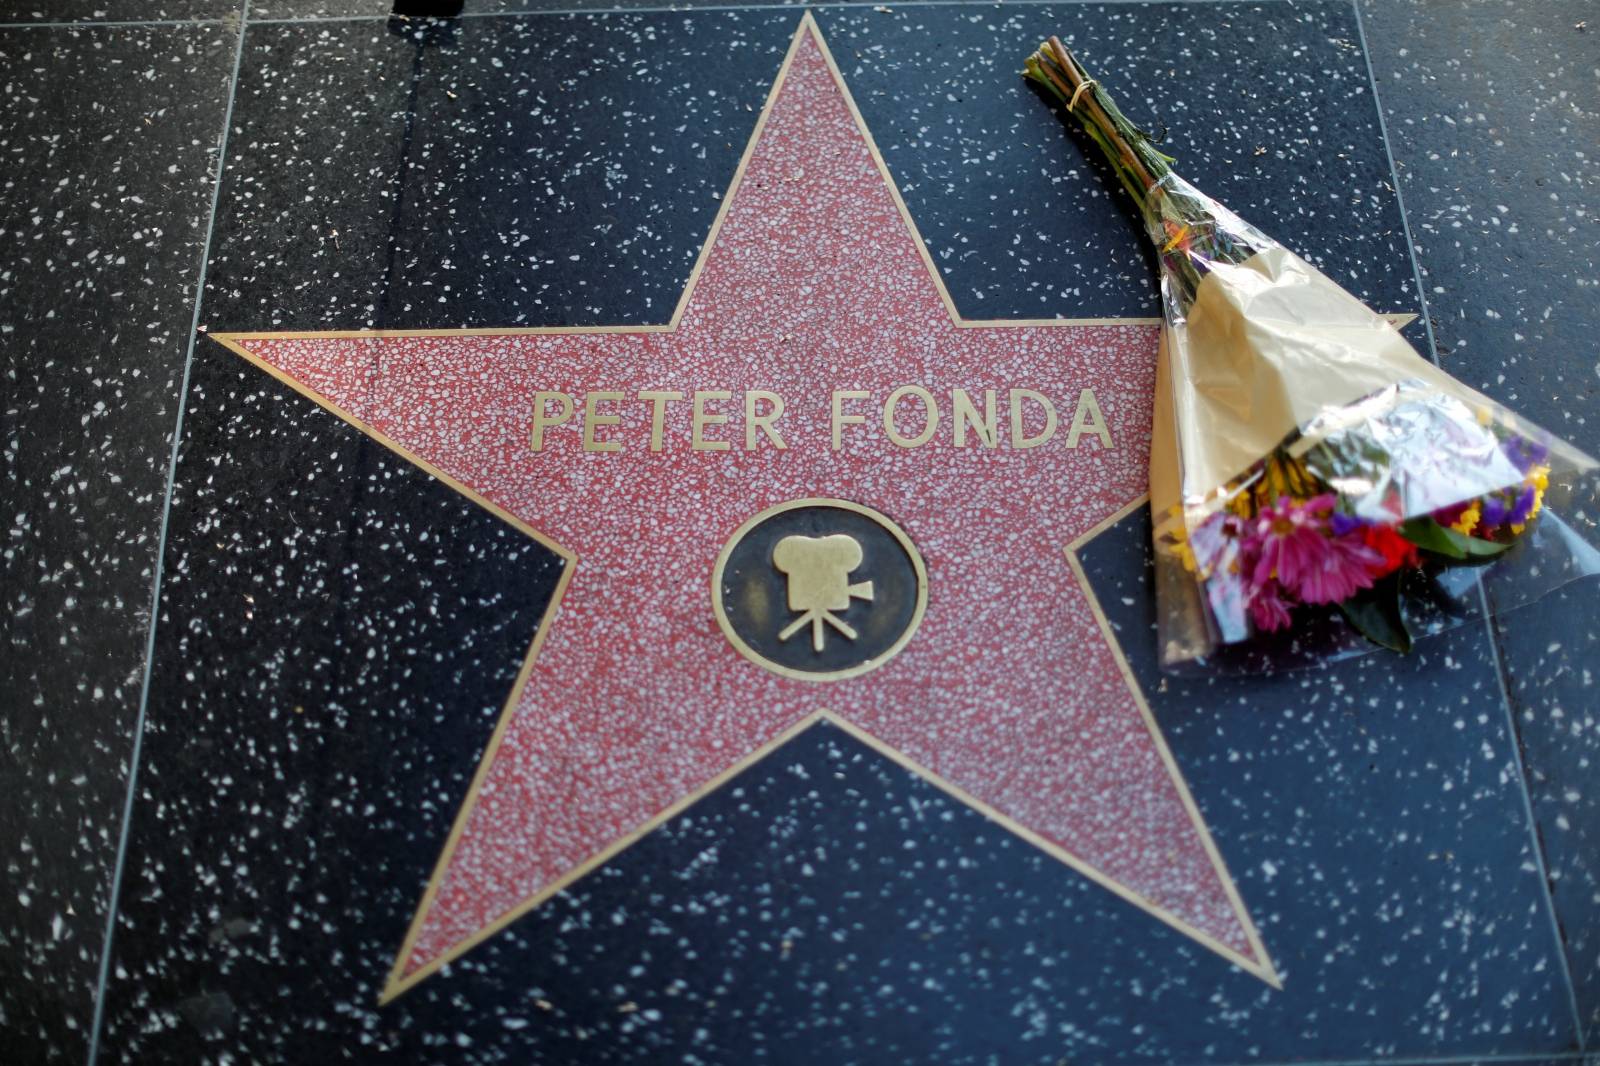 Star of late actor Peter Fonda on the Hollywood Walk of Fame in Los Angeles